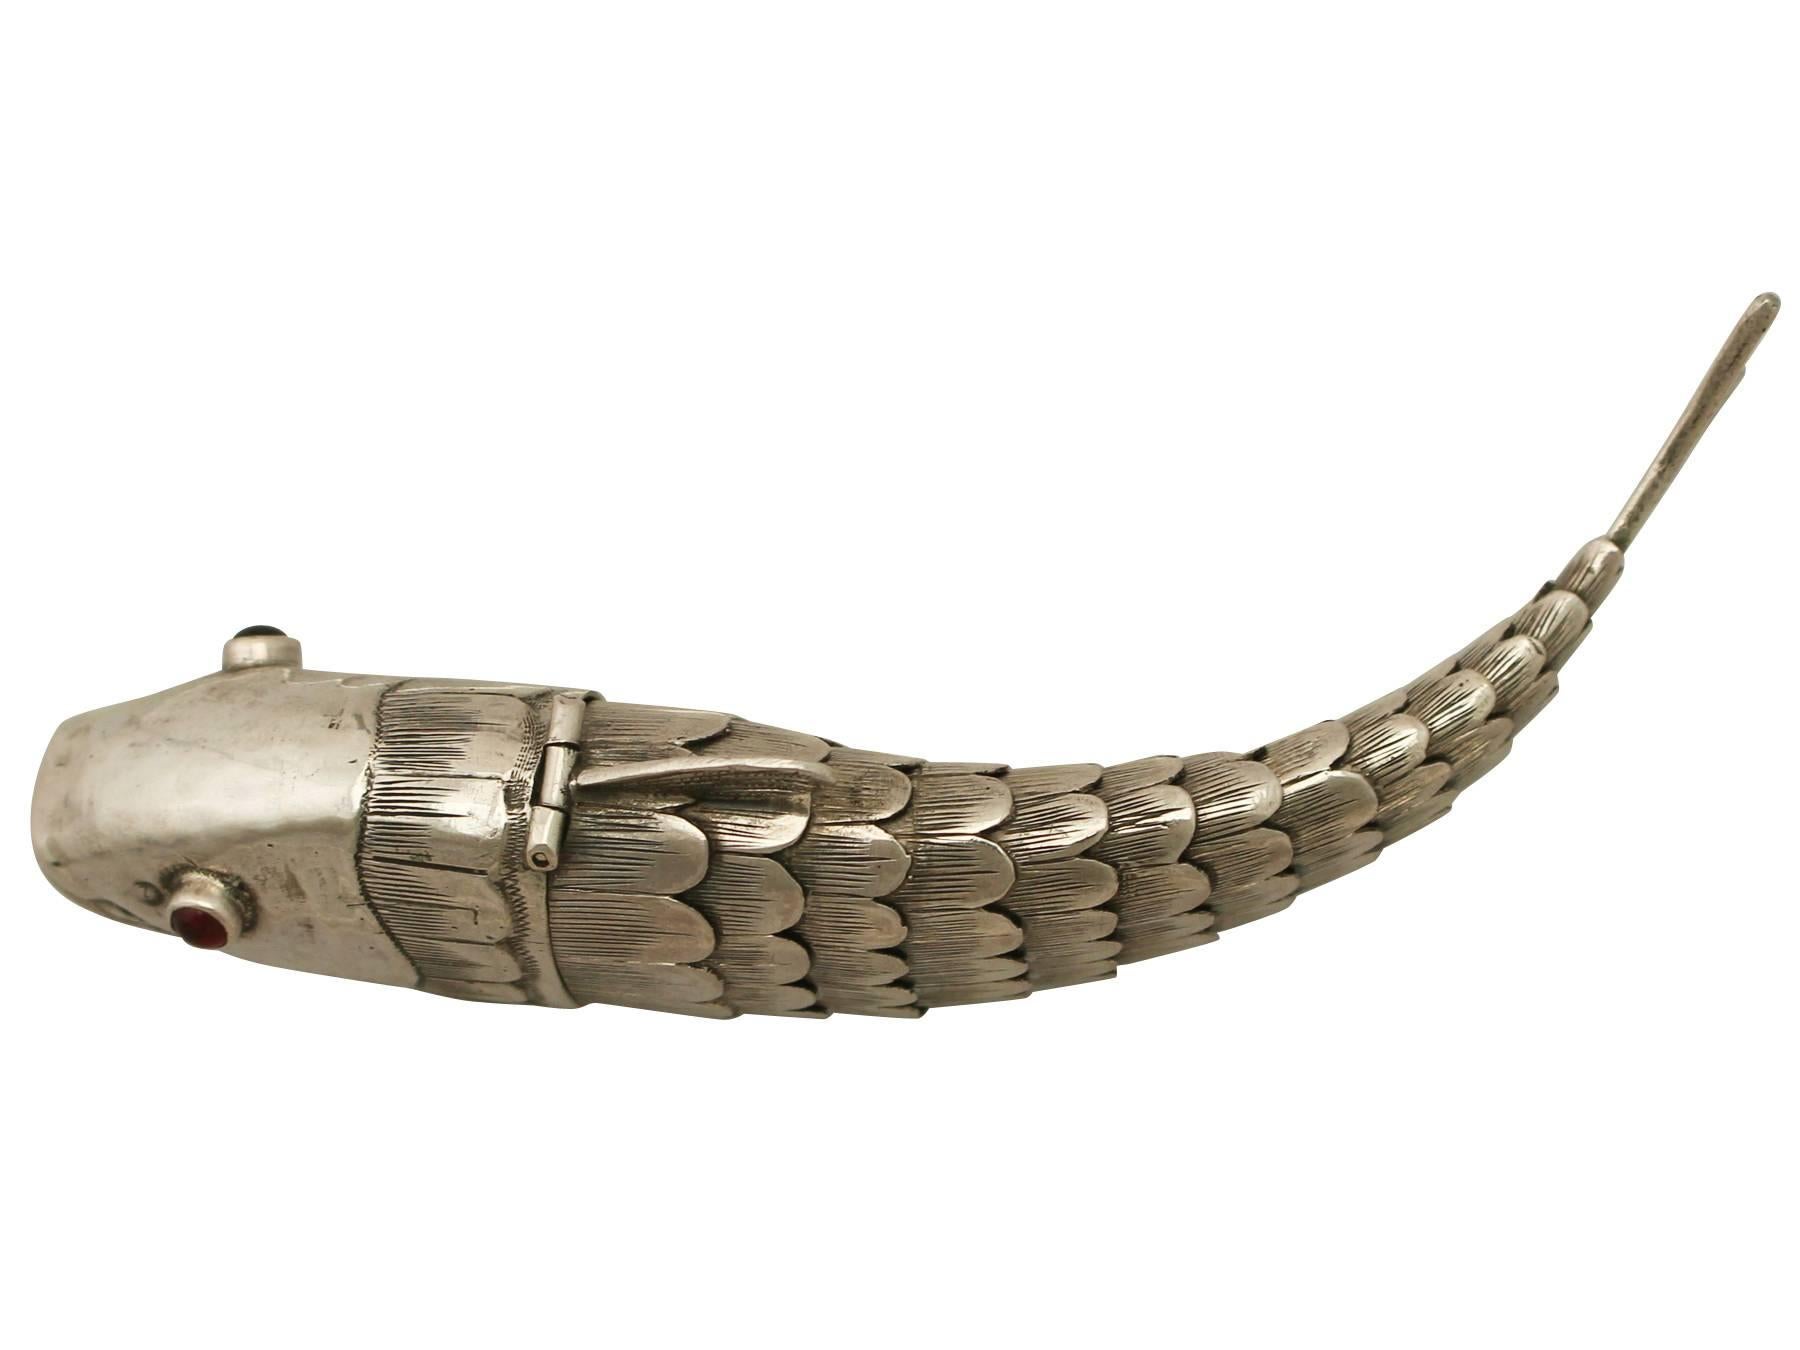 An exceptional, fine and impressive antique German silver spice box realistically modelled in the form of a fish; an addition to our animal related silverware collection.

This exceptional antique German 800 standard silver spice box has been